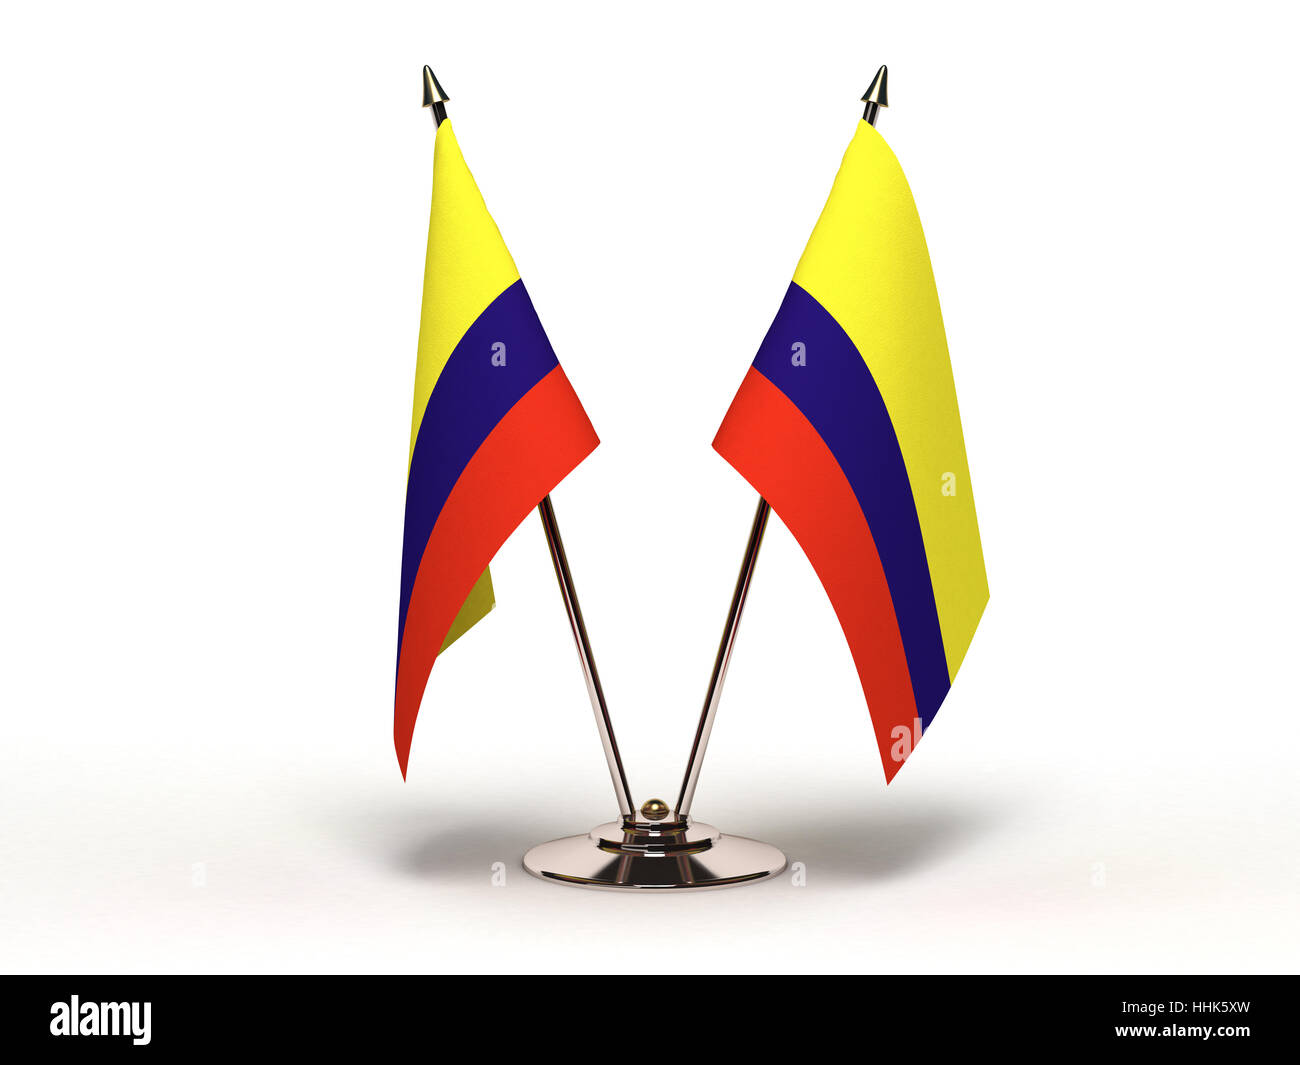 small, tiny, little, short, flag, pole, colombia, miniature, meeting, nobody, Stock Photo